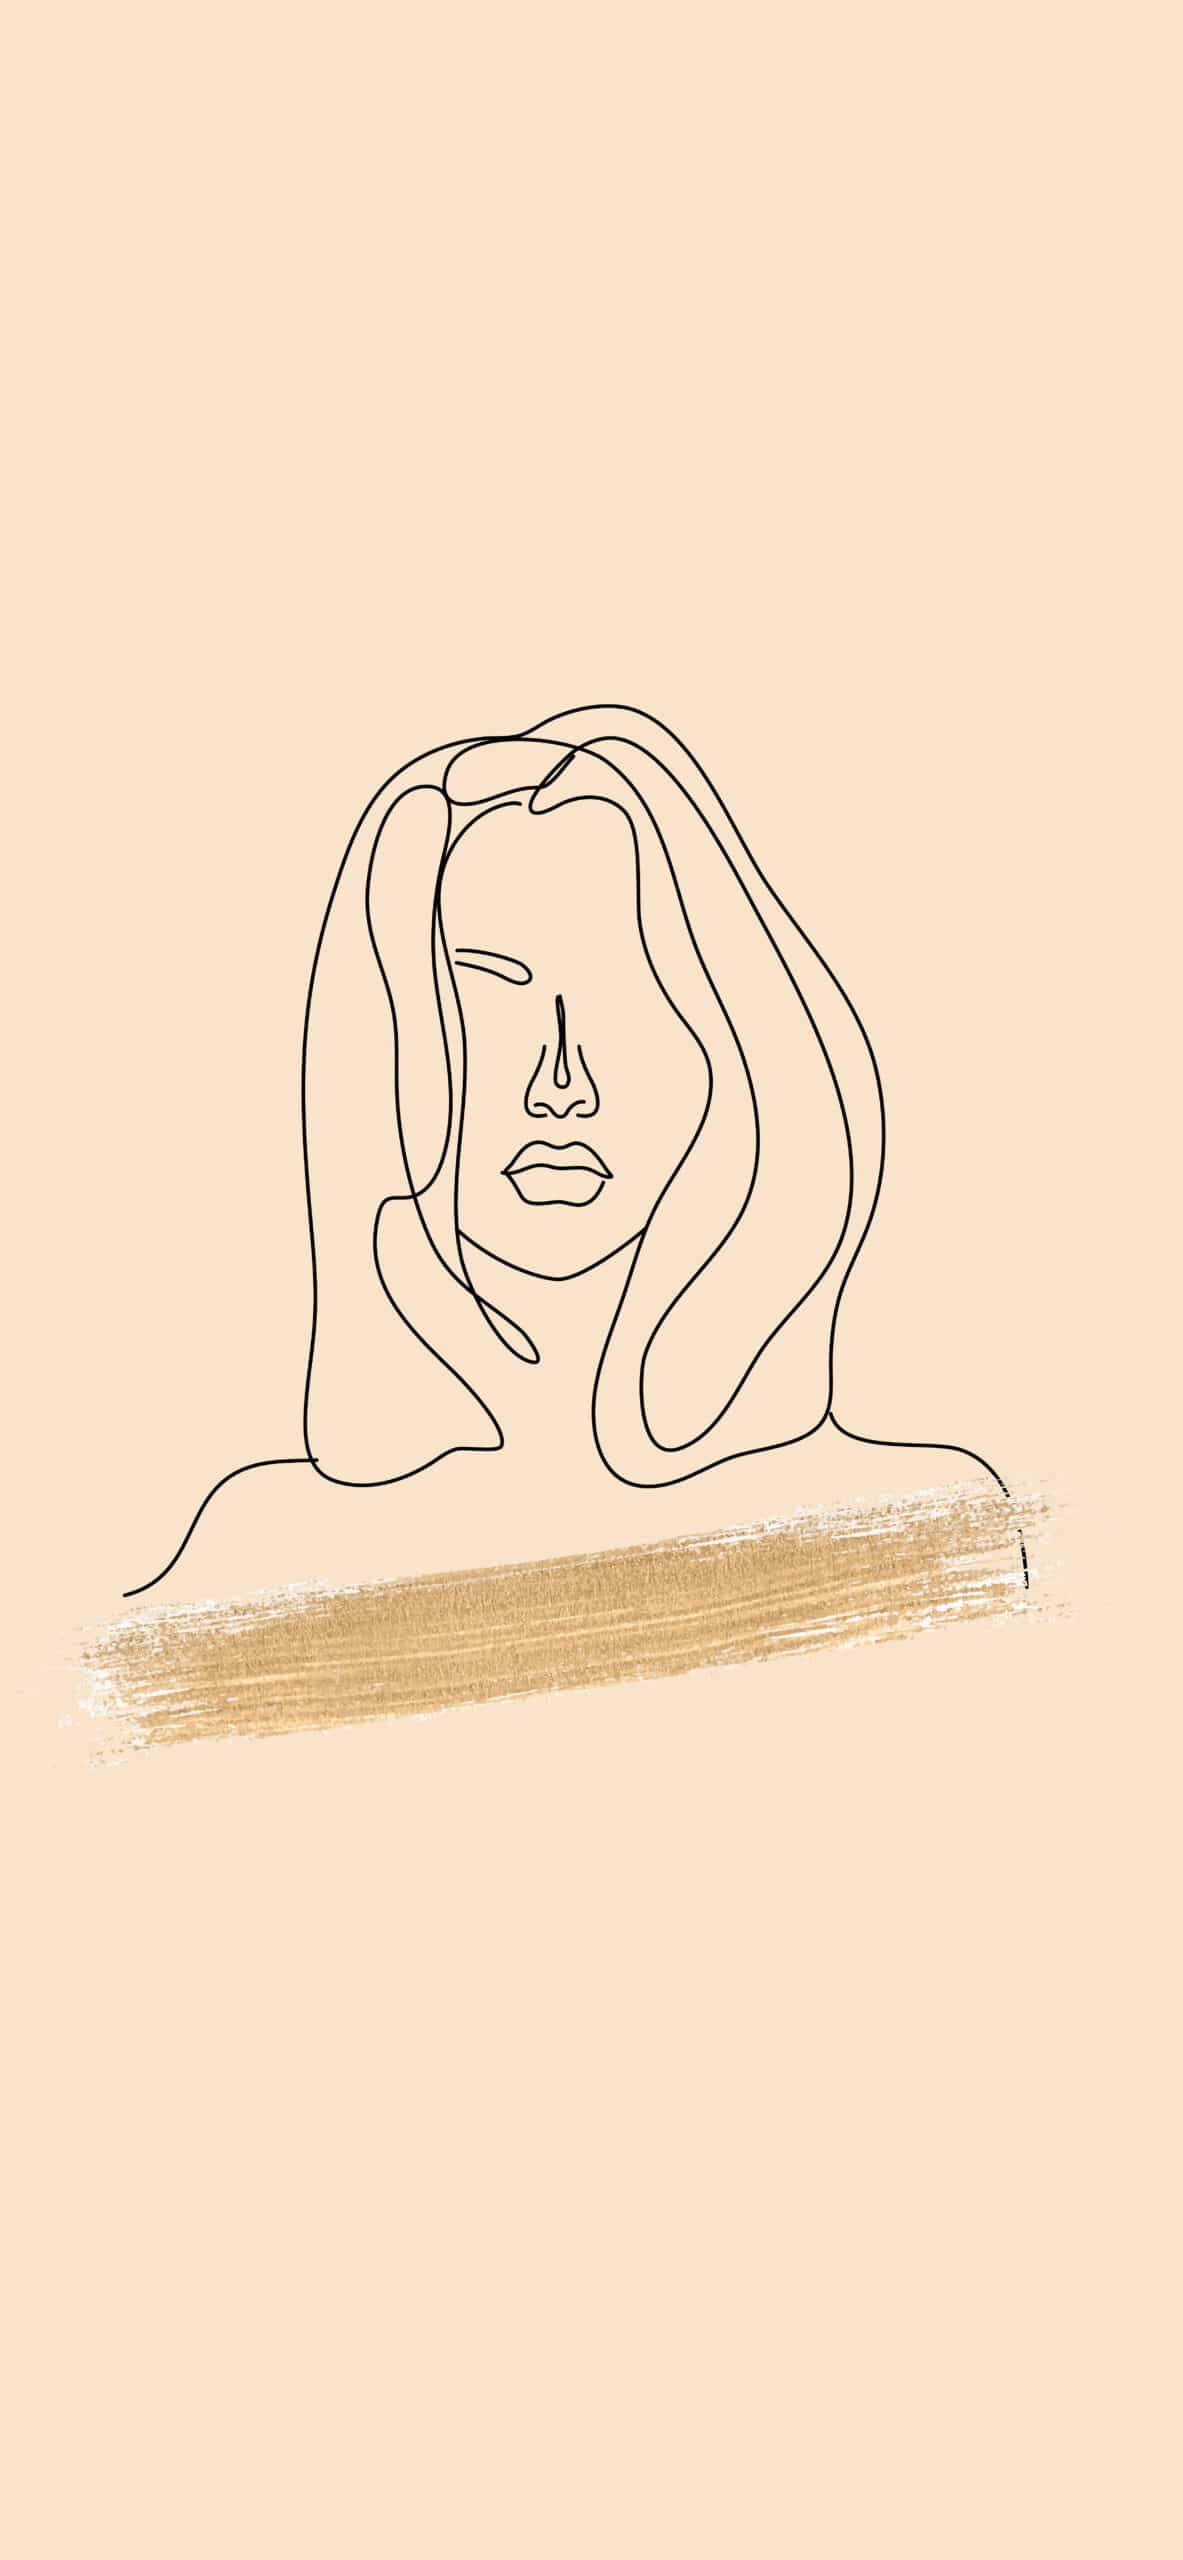 12 Stunning Line Art Girl iPhone Wallpaper and Wall Art You Need To Get!